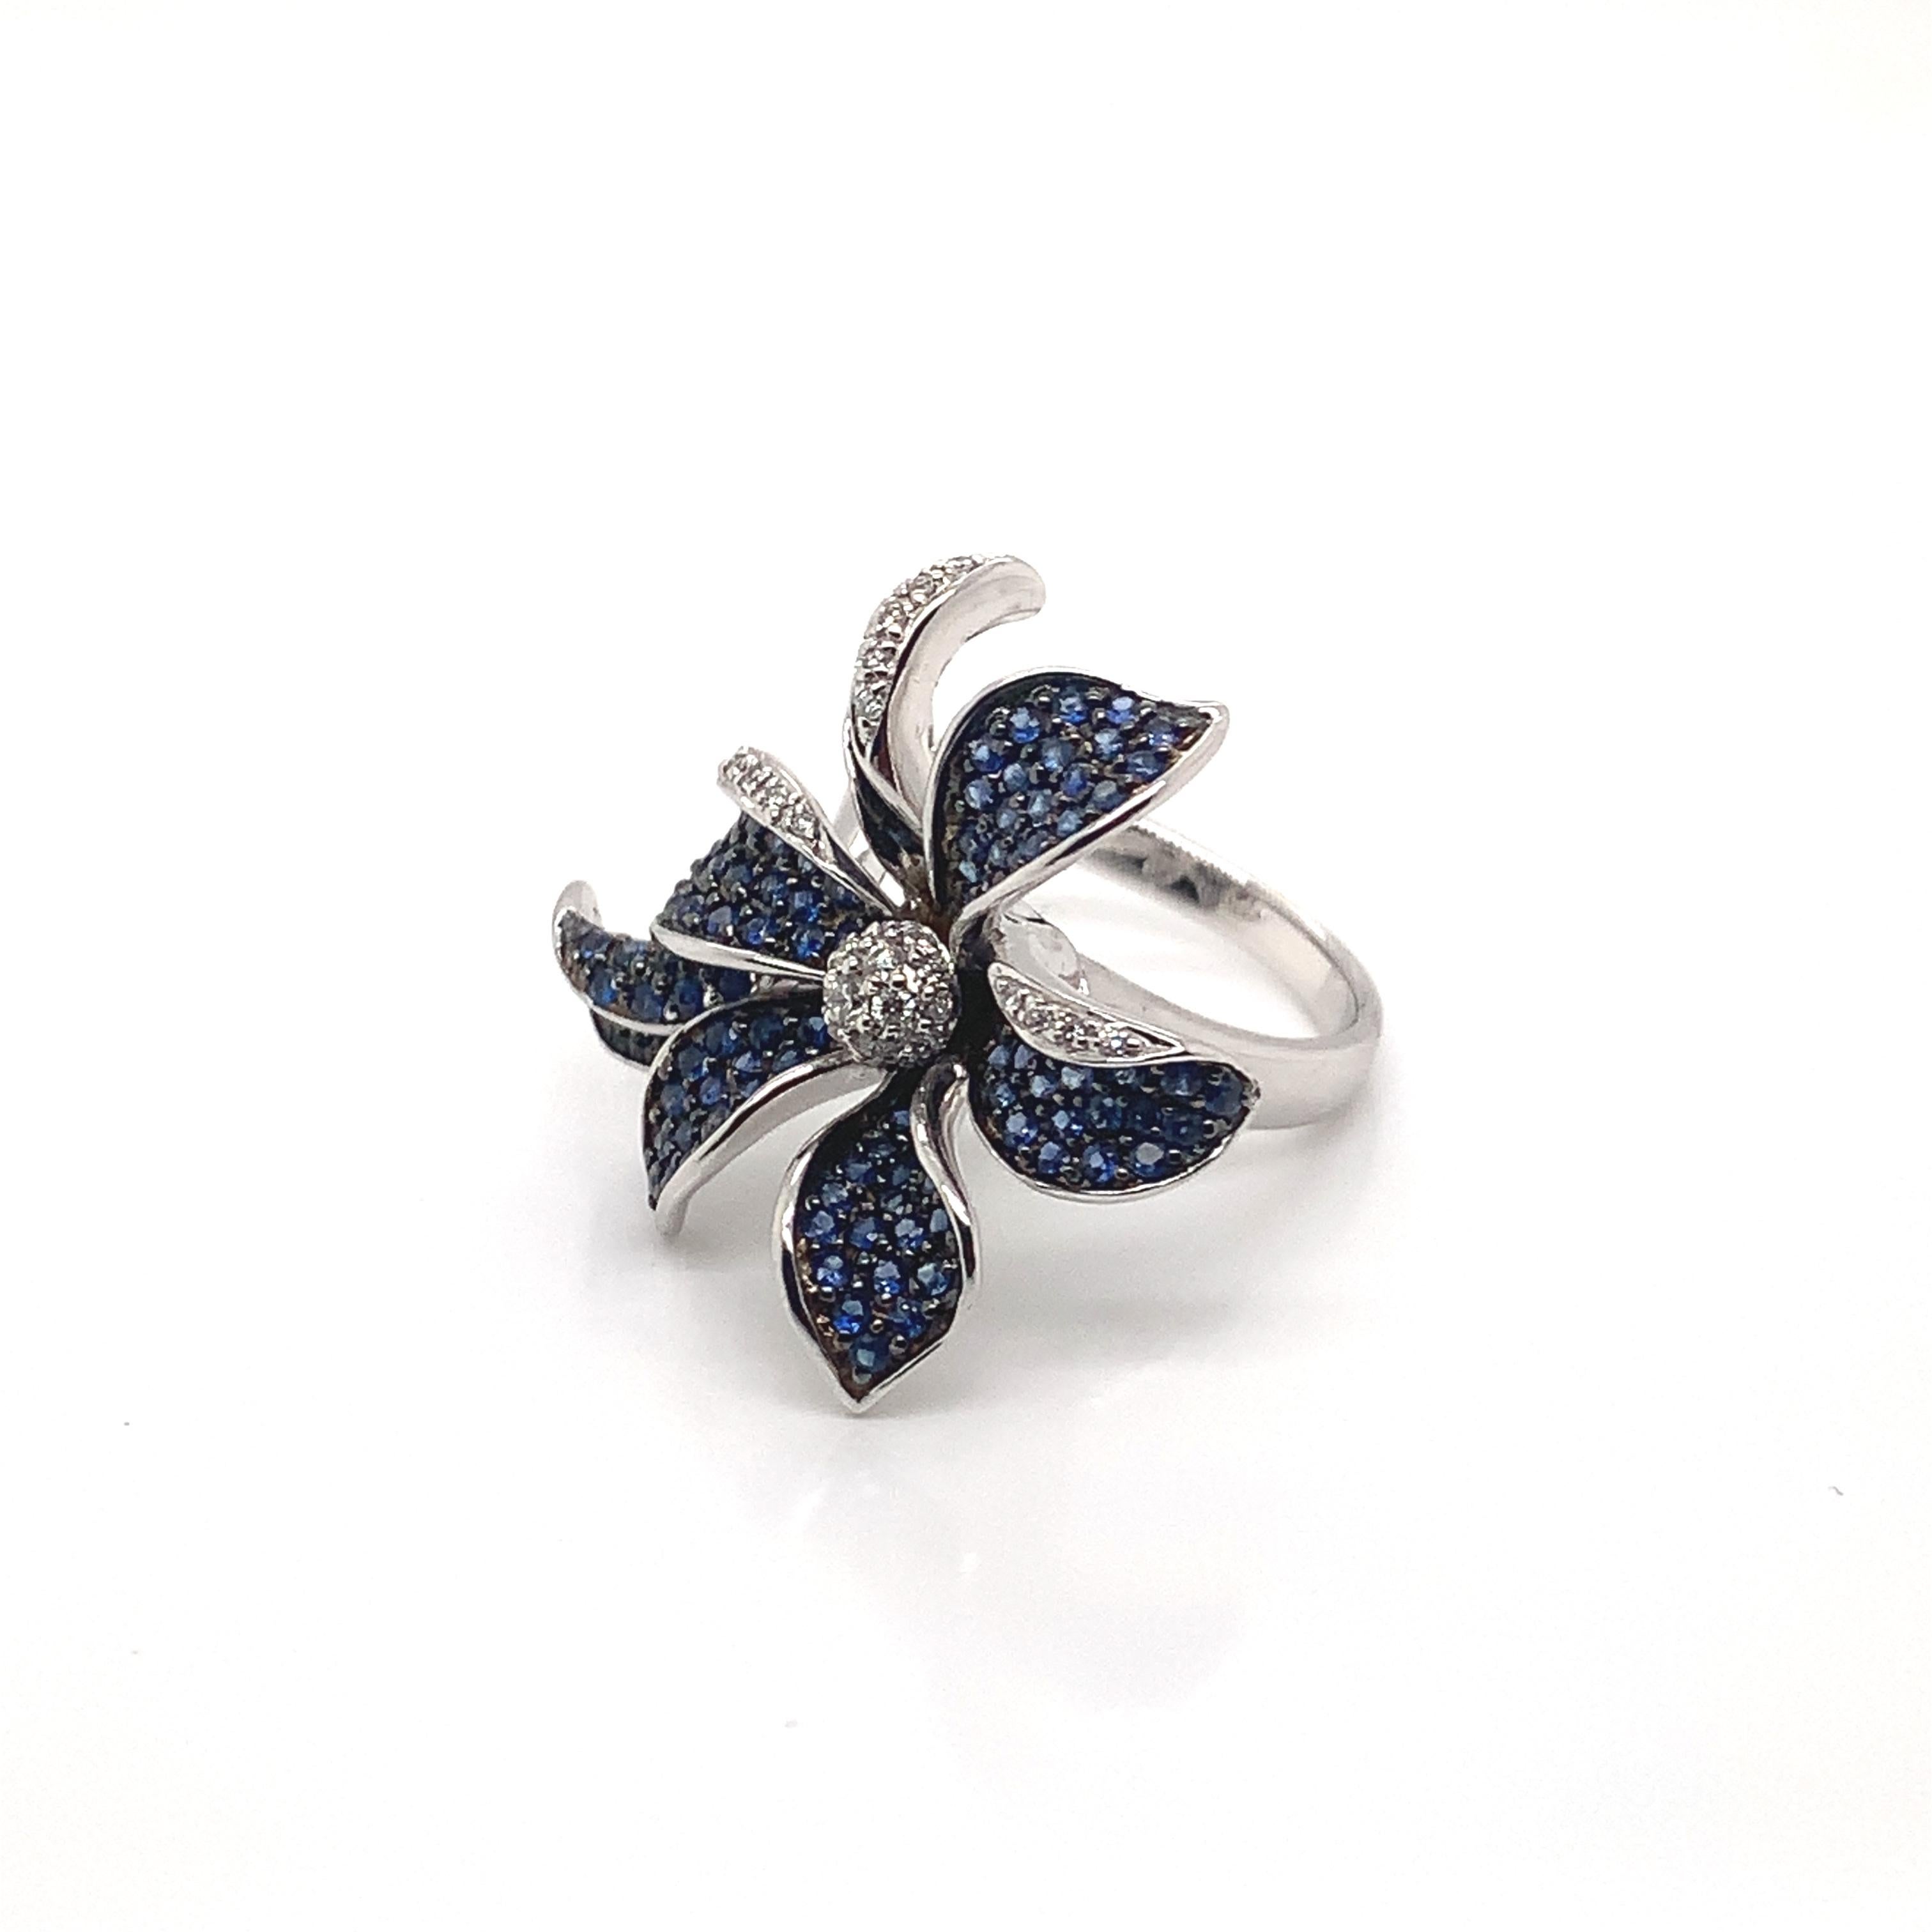 Glamorous Gemstones - Sunita Nahata started off her career as a gemstone trader, and this particular collection reflects her love for multi-colored semi-precious gemstones. This ring presents a floral blue sapphire with white diamond detailing. 